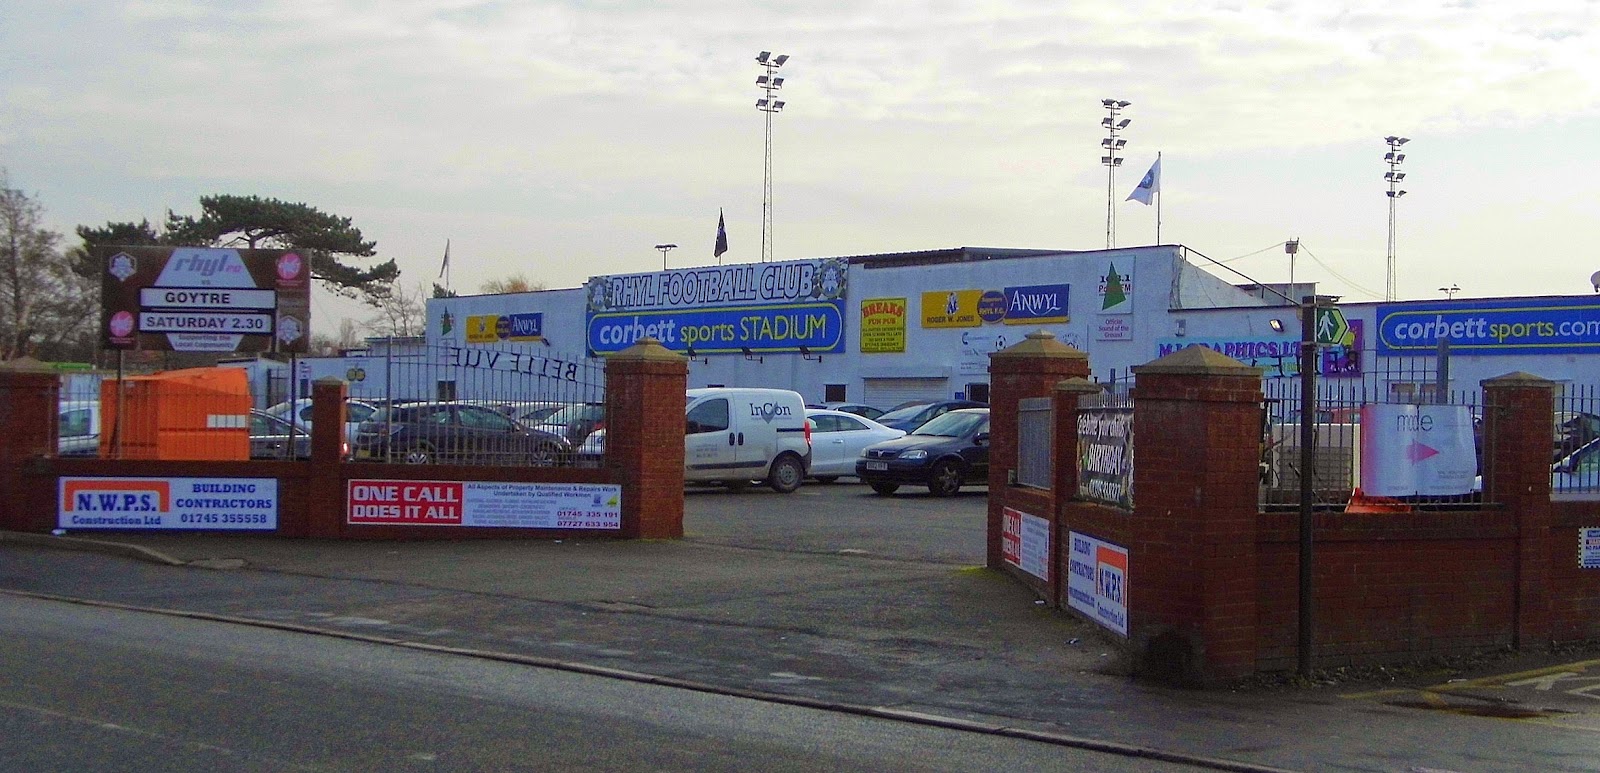 Rhyl FC’s stadium ‘Belle Vue’ set to be demolished and replaced with high rise housing development for ‘EX’ cons